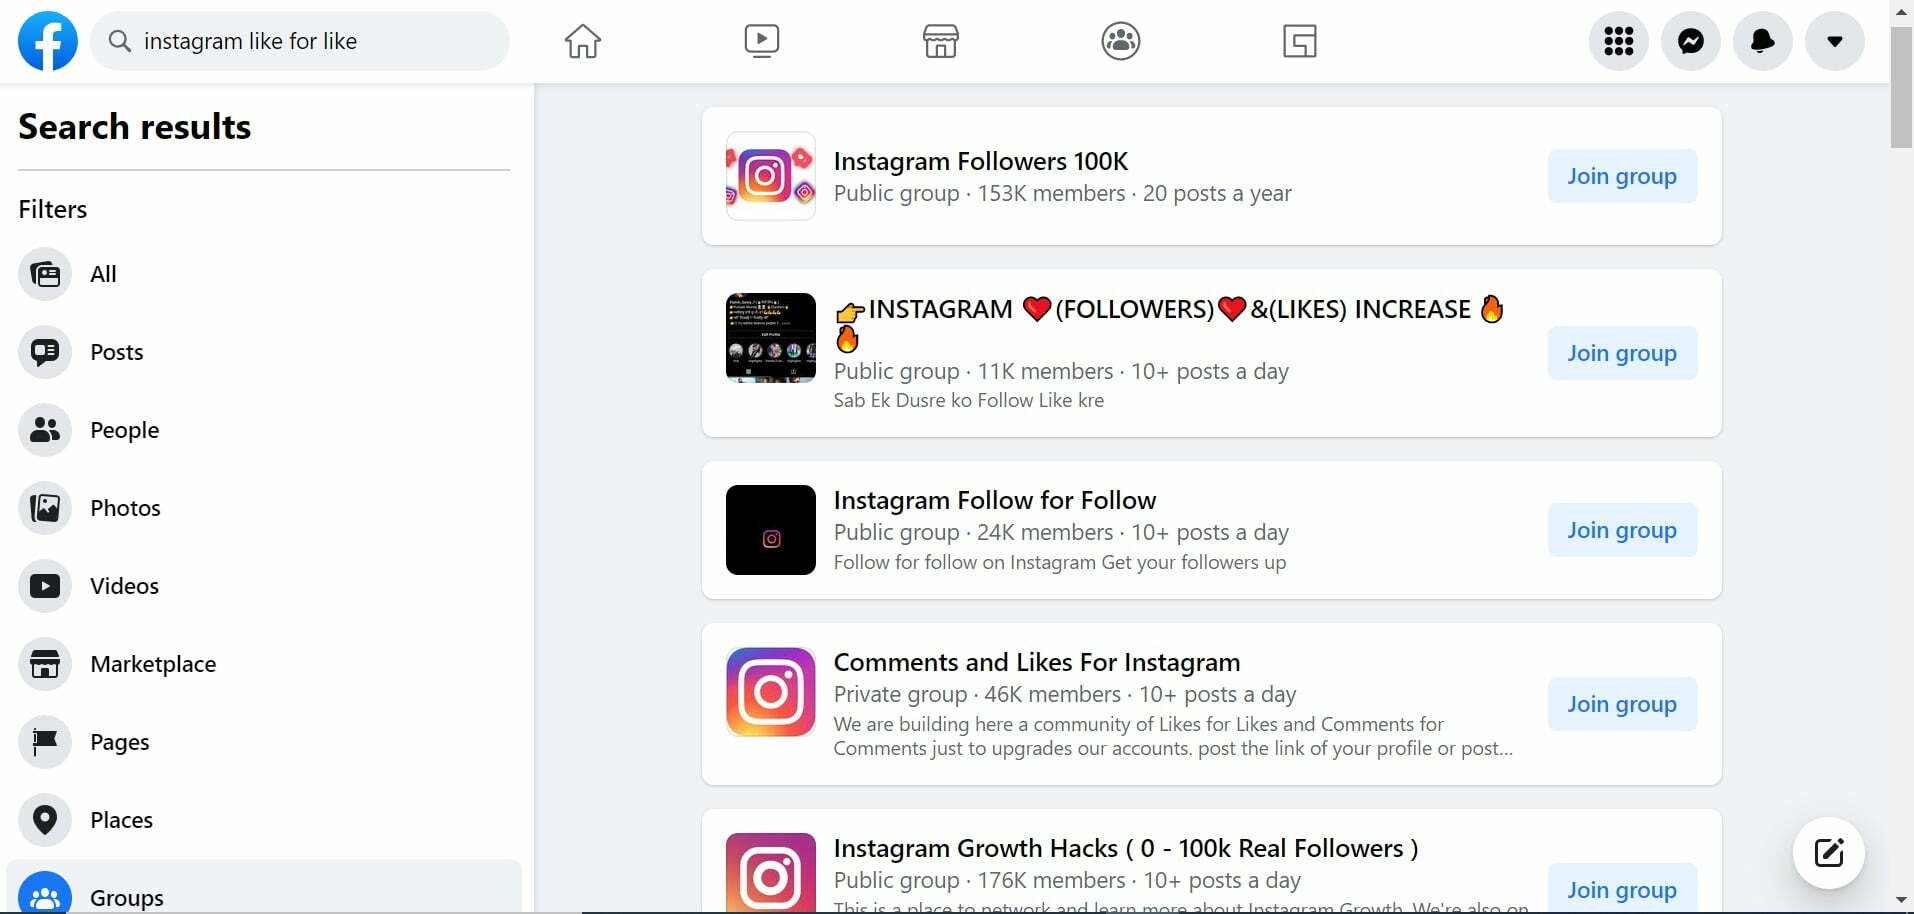 Instagram pods - How to Use Instagram Pods to Increase Engagement and Growth - 1